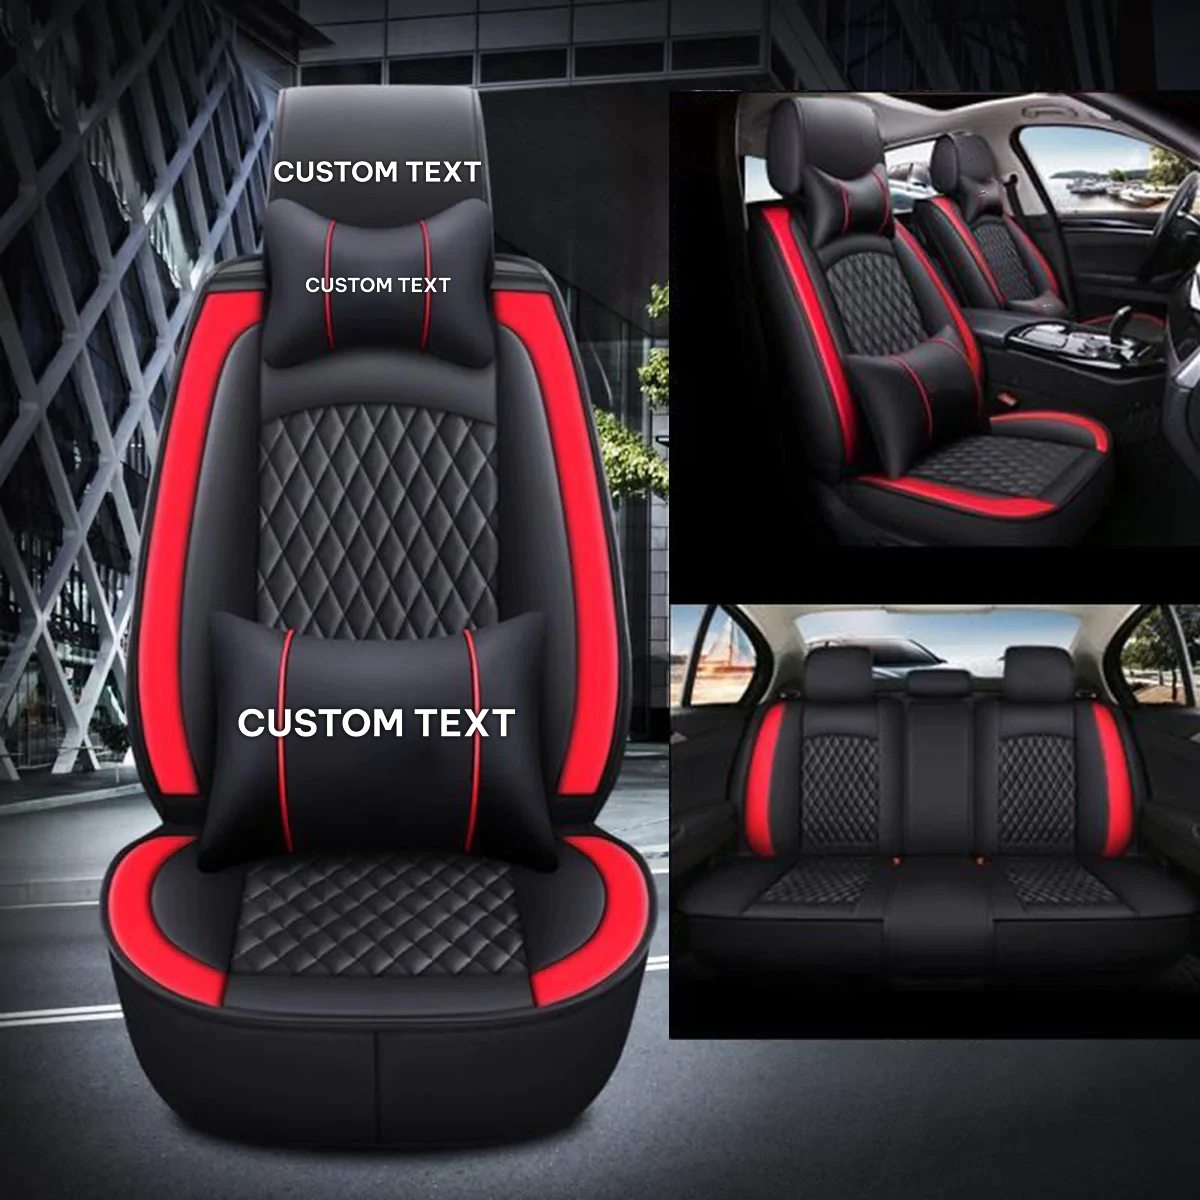 Custom Text For Seat Covers 5 Seats Full Set, Custom Fit For Your Cars, Leatherette Automotive Seat Cushion Protector Universal Fit, Vehicle Auto Interior Decor MA13988